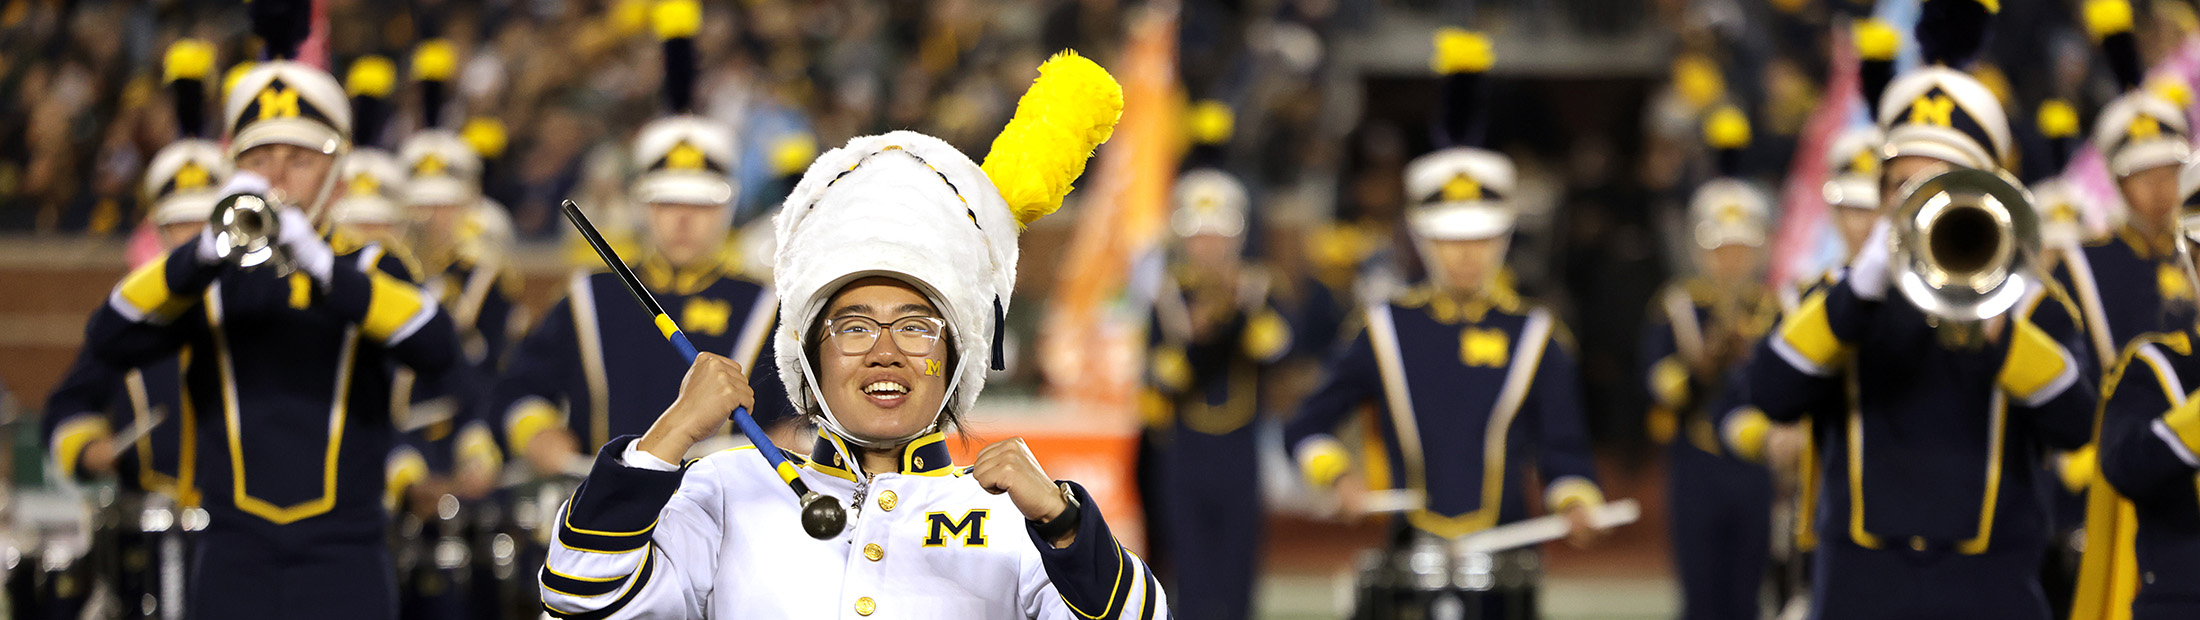 Rachel Zhang in her drum major uniform with fists partially raised while surrounded by other marching band members playing their instruments on the field at Michigan Stadium under the lights.